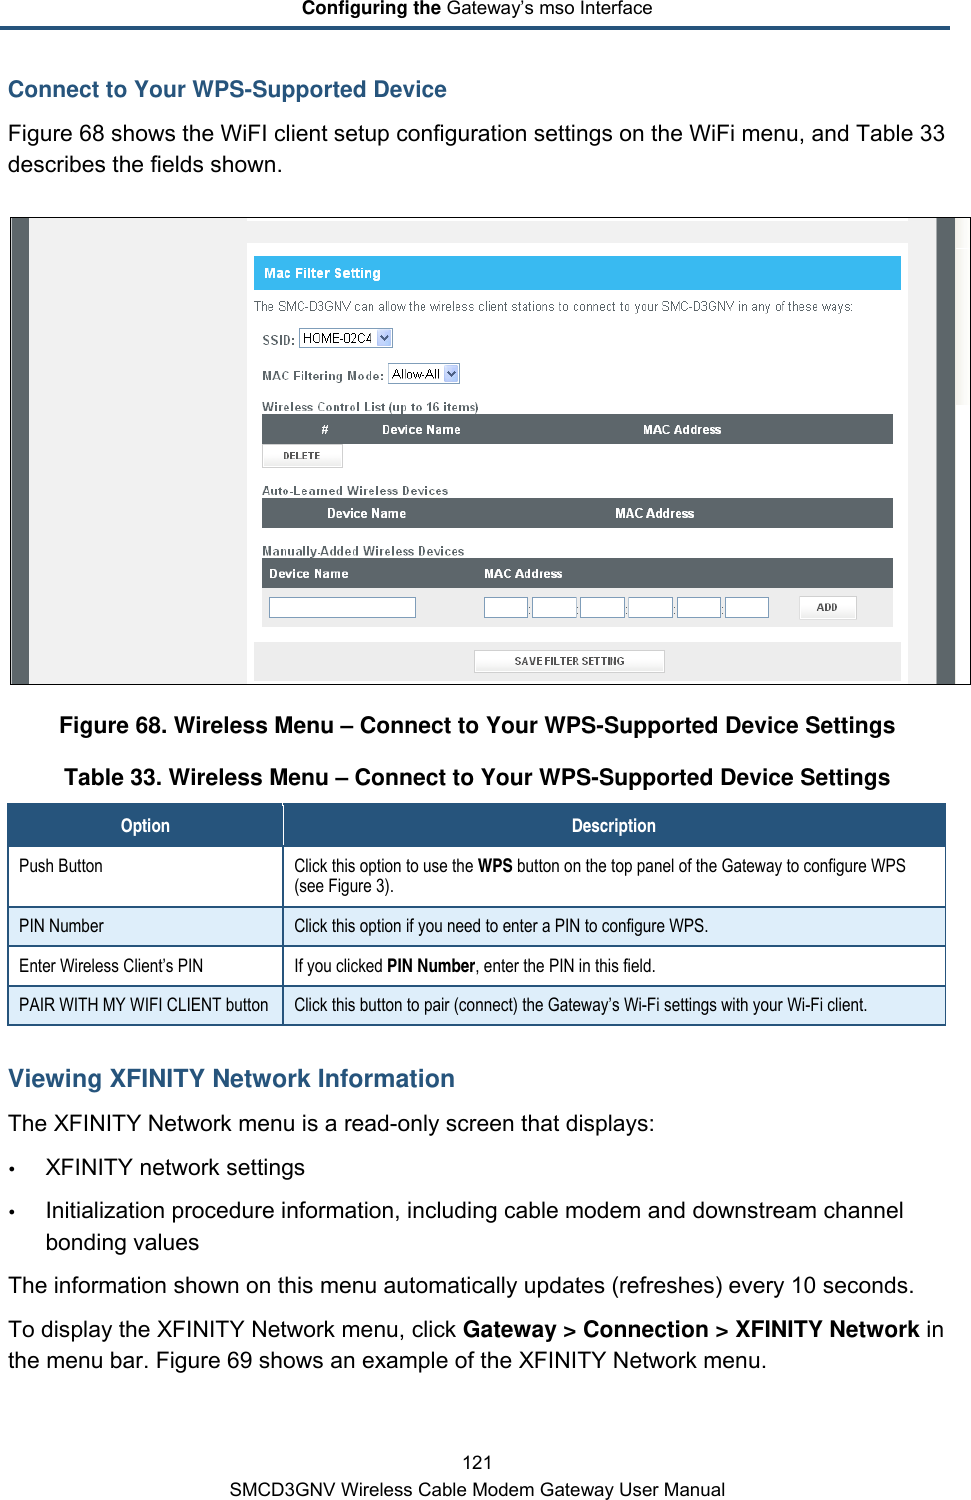 Configuring the Gateway’s mso Interface 121 SMCD3GNV Wireless Cable Modem Gateway User Manual Connect to Your WPS-Supported Device Figure 68 shows the WiFI client setup configuration settings on the WiFi menu, and Table 33 describes the fields shown.  Figure 68. Wireless Menu – Connect to Your WPS-Supported Device Settings Table 33. Wireless Menu – Connect to Your WPS-Supported Device Settings Option Description Push Button Click this option to use the WPS button on the top panel of the Gateway to configure WPS (see Figure 3). PIN Number Click this option if you need to enter a PIN to configure WPS.  Enter Wireless Client’s PIN If you clicked PIN Number, enter the PIN in this field. PAIR WITH MY WIFI CLIENT button Click this button to pair (connect) the Gateway’s Wi-Fi settings with your Wi-Fi client. Viewing XFINITY Network Information The XFINITY Network menu is a read-only screen that displays:  XFINITY network settings  Initialization procedure information, including cable modem and downstream channel bonding values  The information shown on this menu automatically updates (refreshes) every 10 seconds. To display the XFINITY Network menu, click Gateway &gt; Connection &gt; XFINITY Network in the menu bar. Figure 69 shows an example of the XFINITY Network menu. 